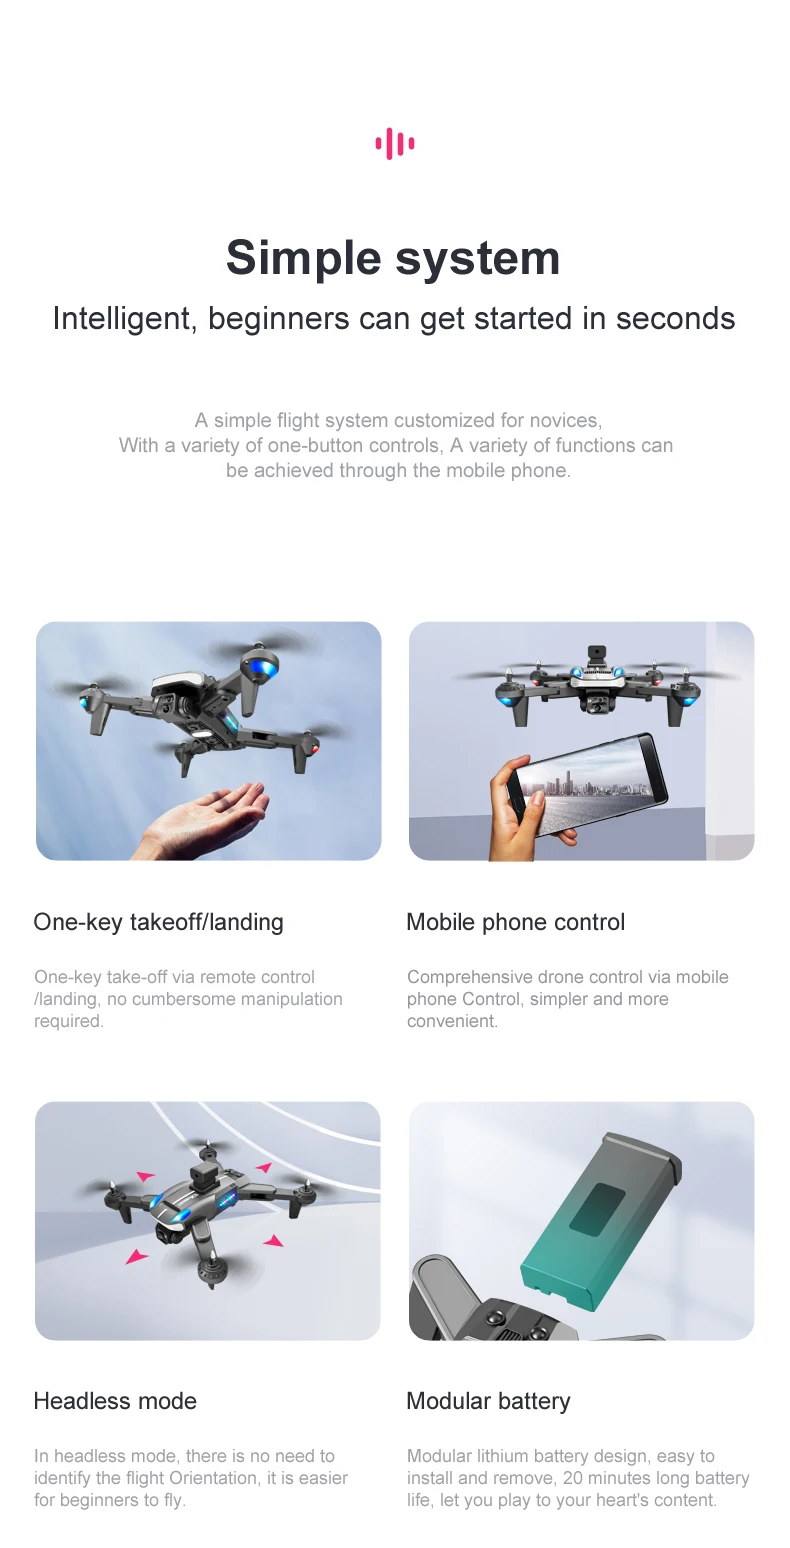 K8 Drone, simple flight system customized for novices, with a variety of one